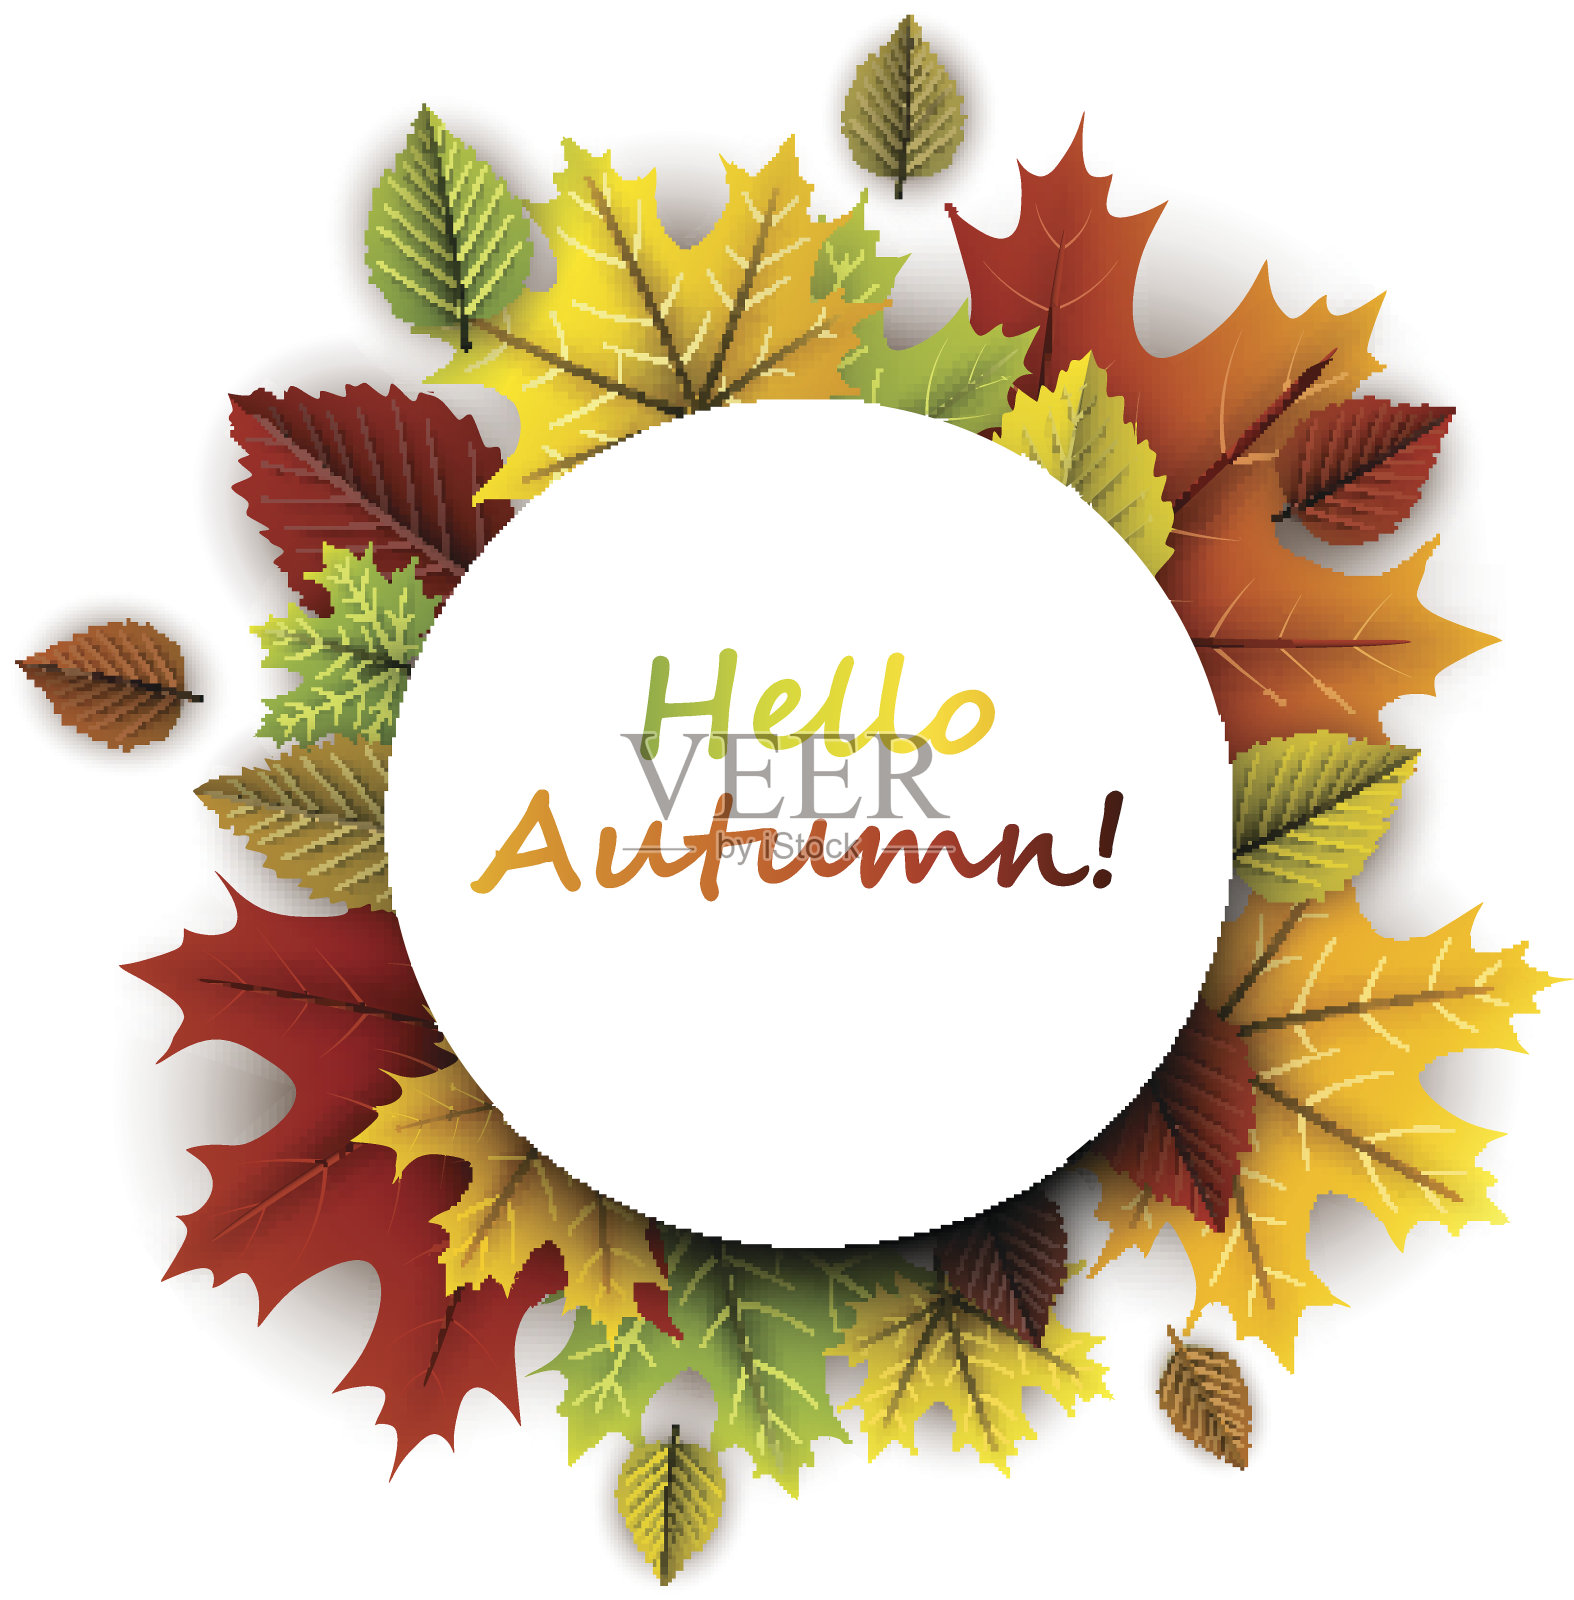 Hello autumn card with colorful leaves.秋天卡片。插画图片素材